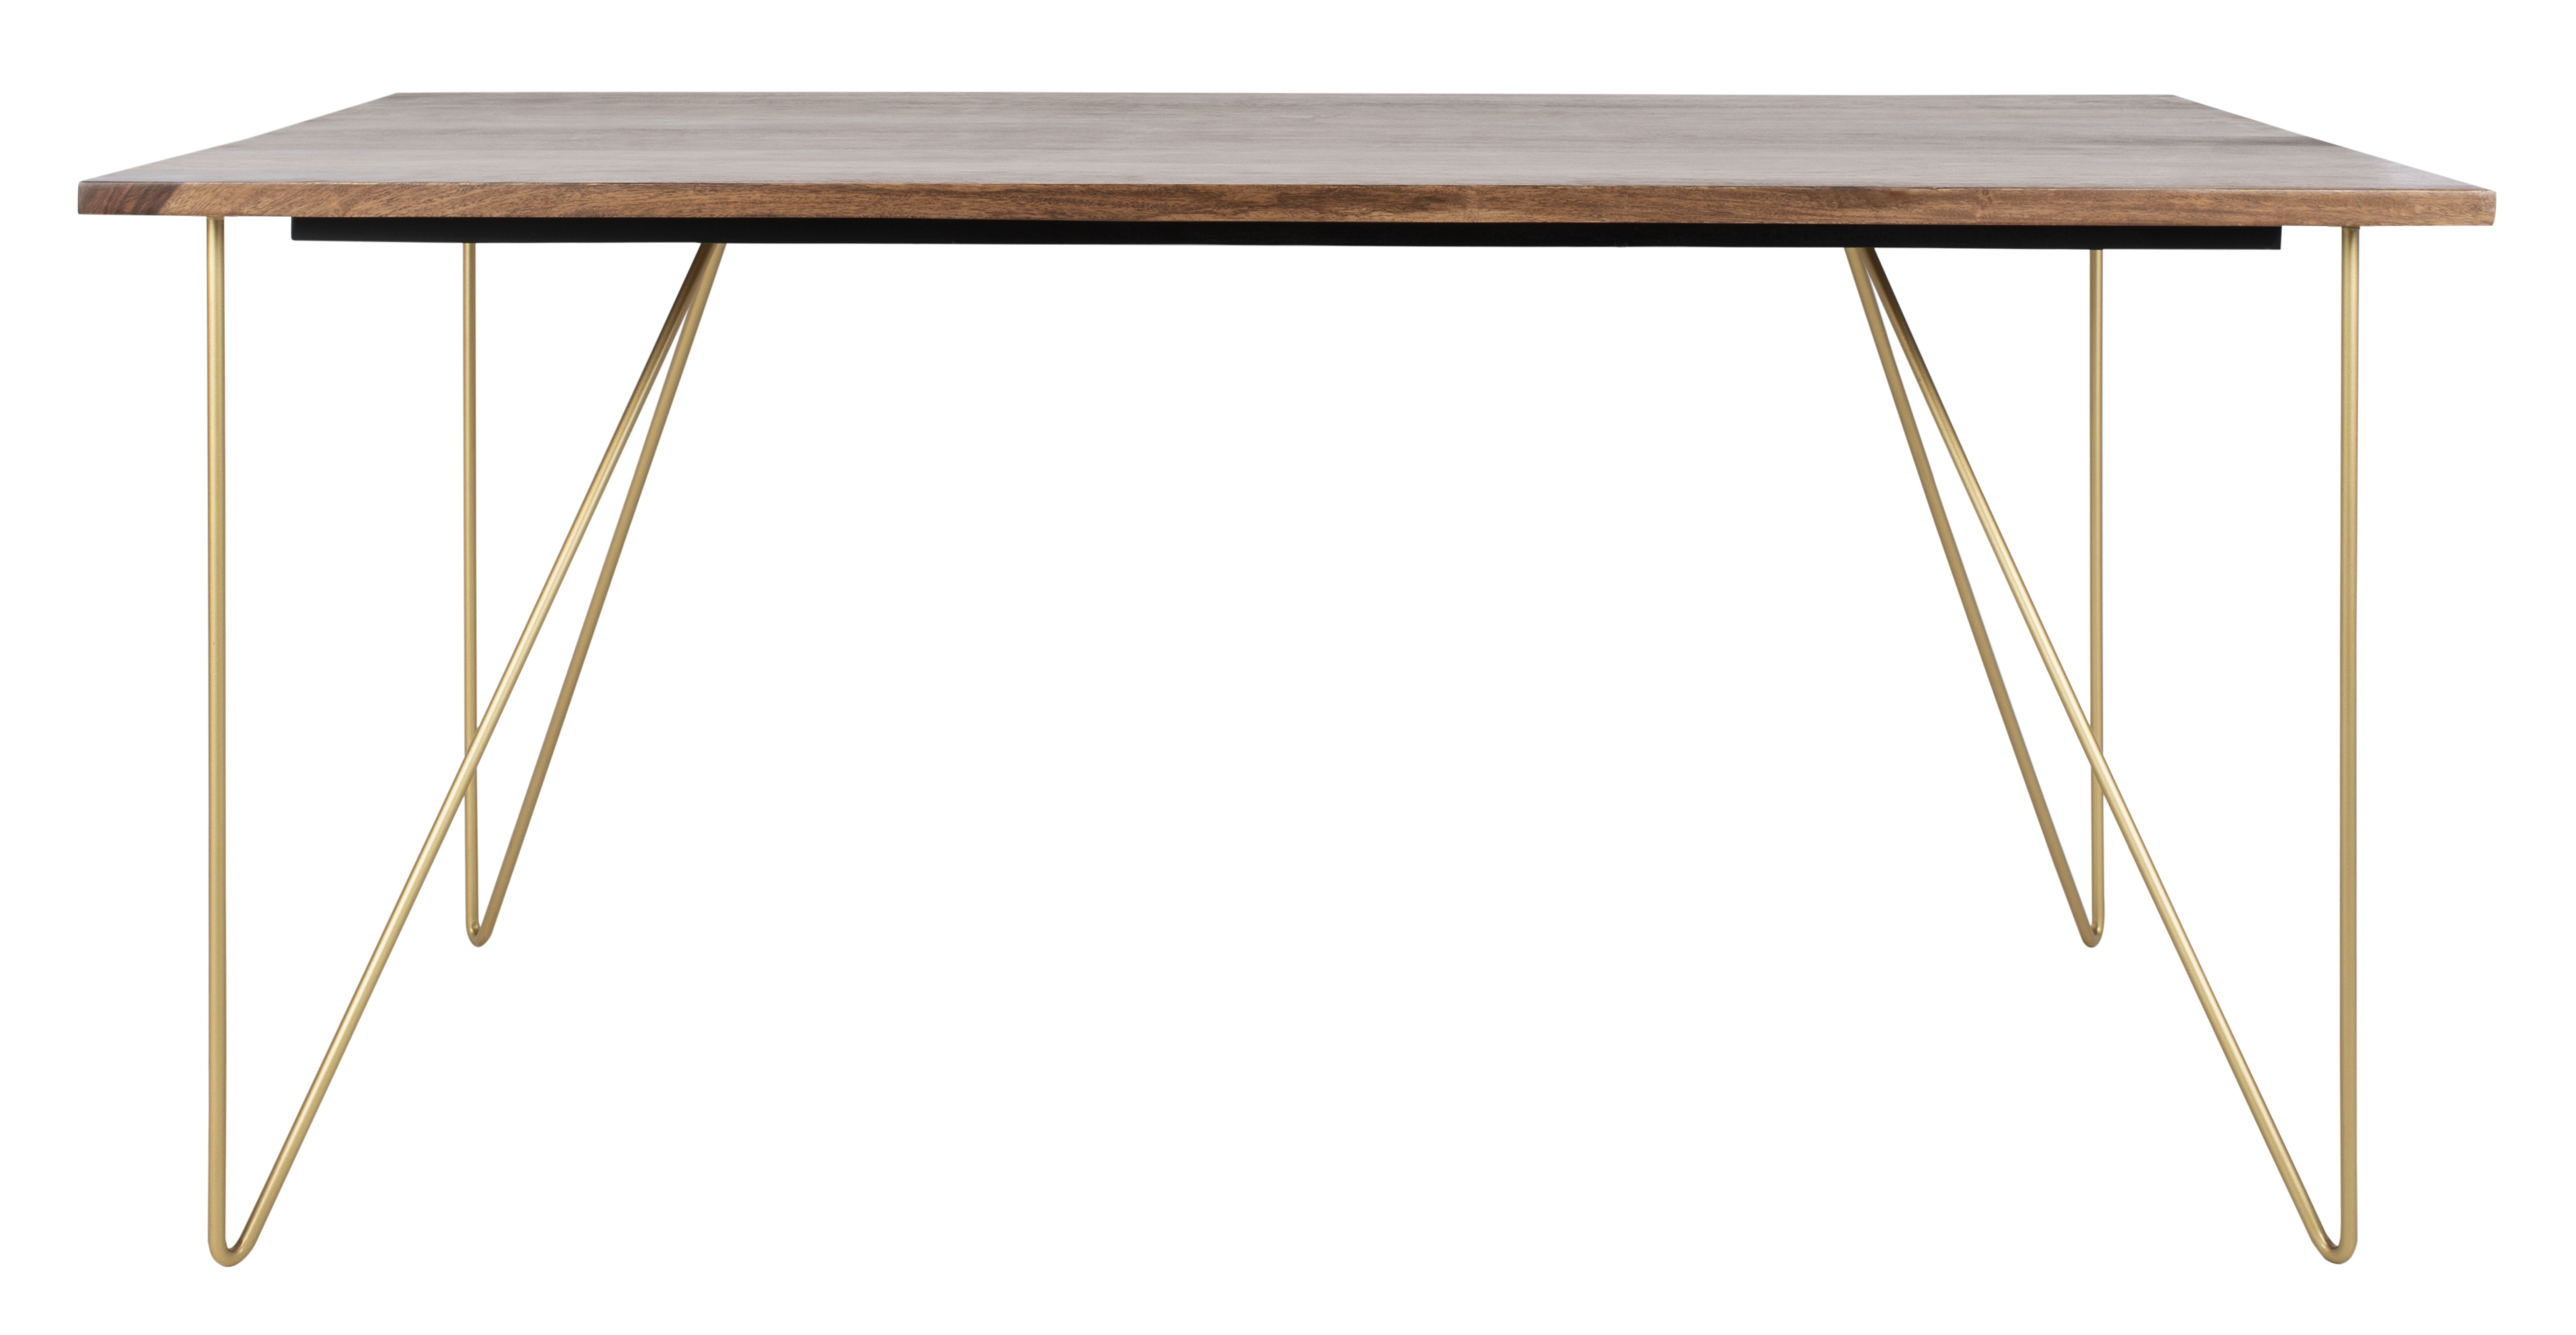 Captain Hairpin Legs Wood Dining Table - Walnut/Brass - Arlo Home - Image 0